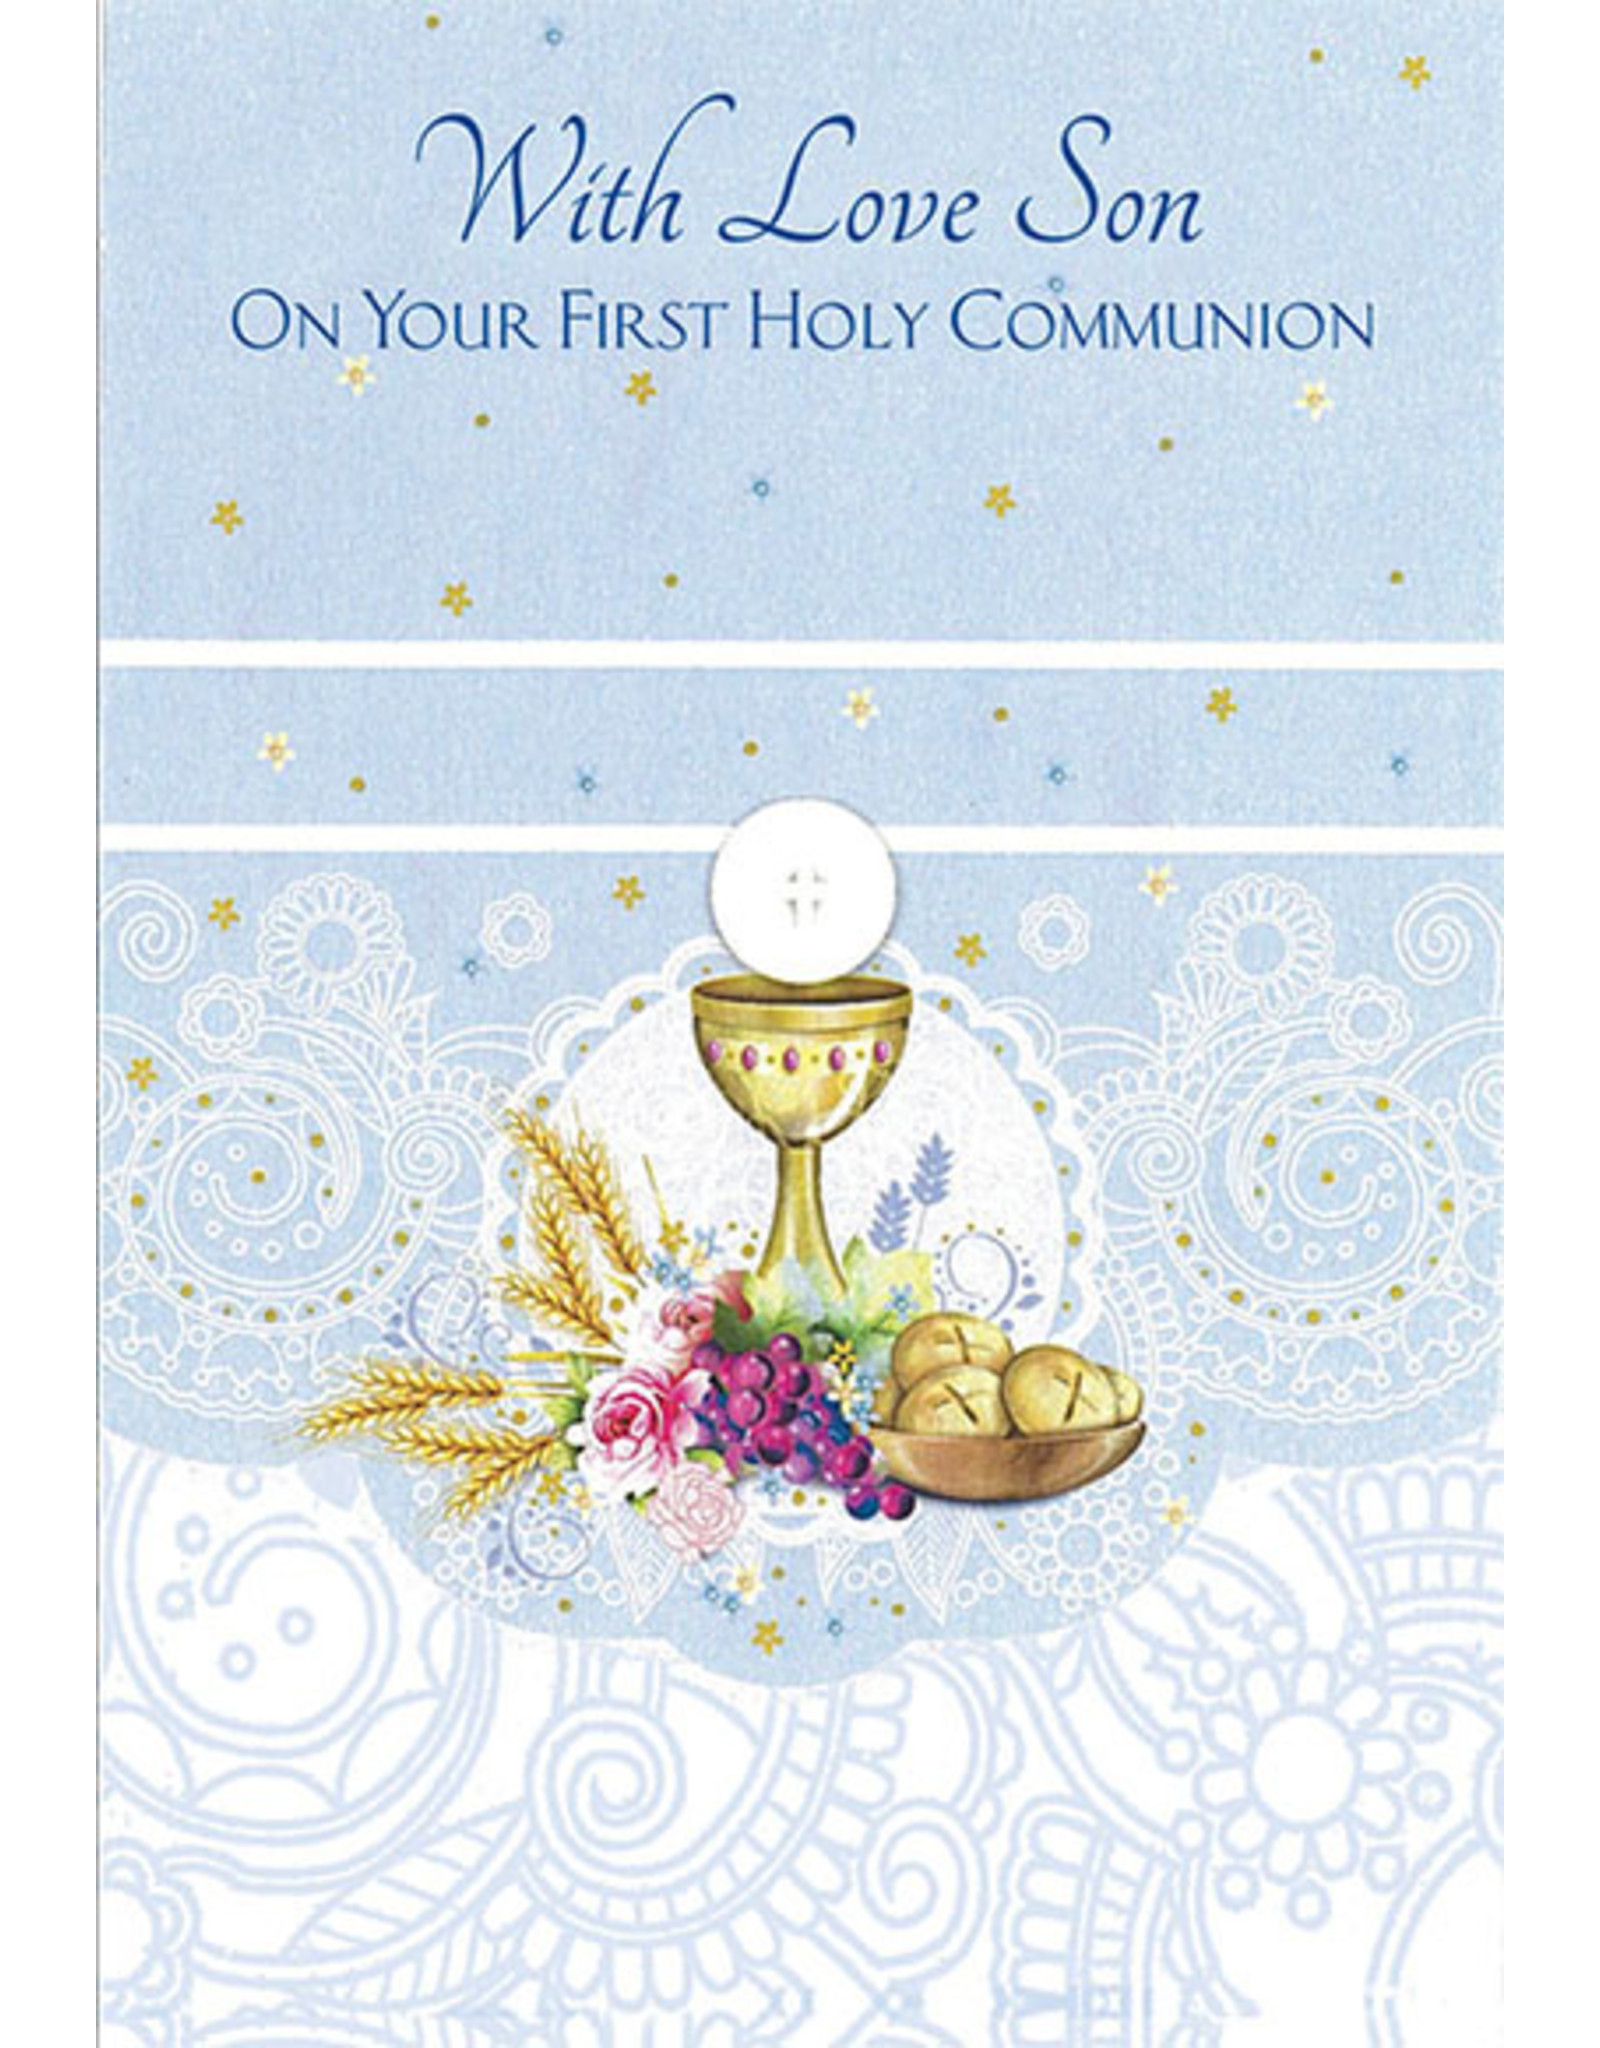 Greetings of Faith Card - First Communion Son, Blue with Swirl Detailing & Stars